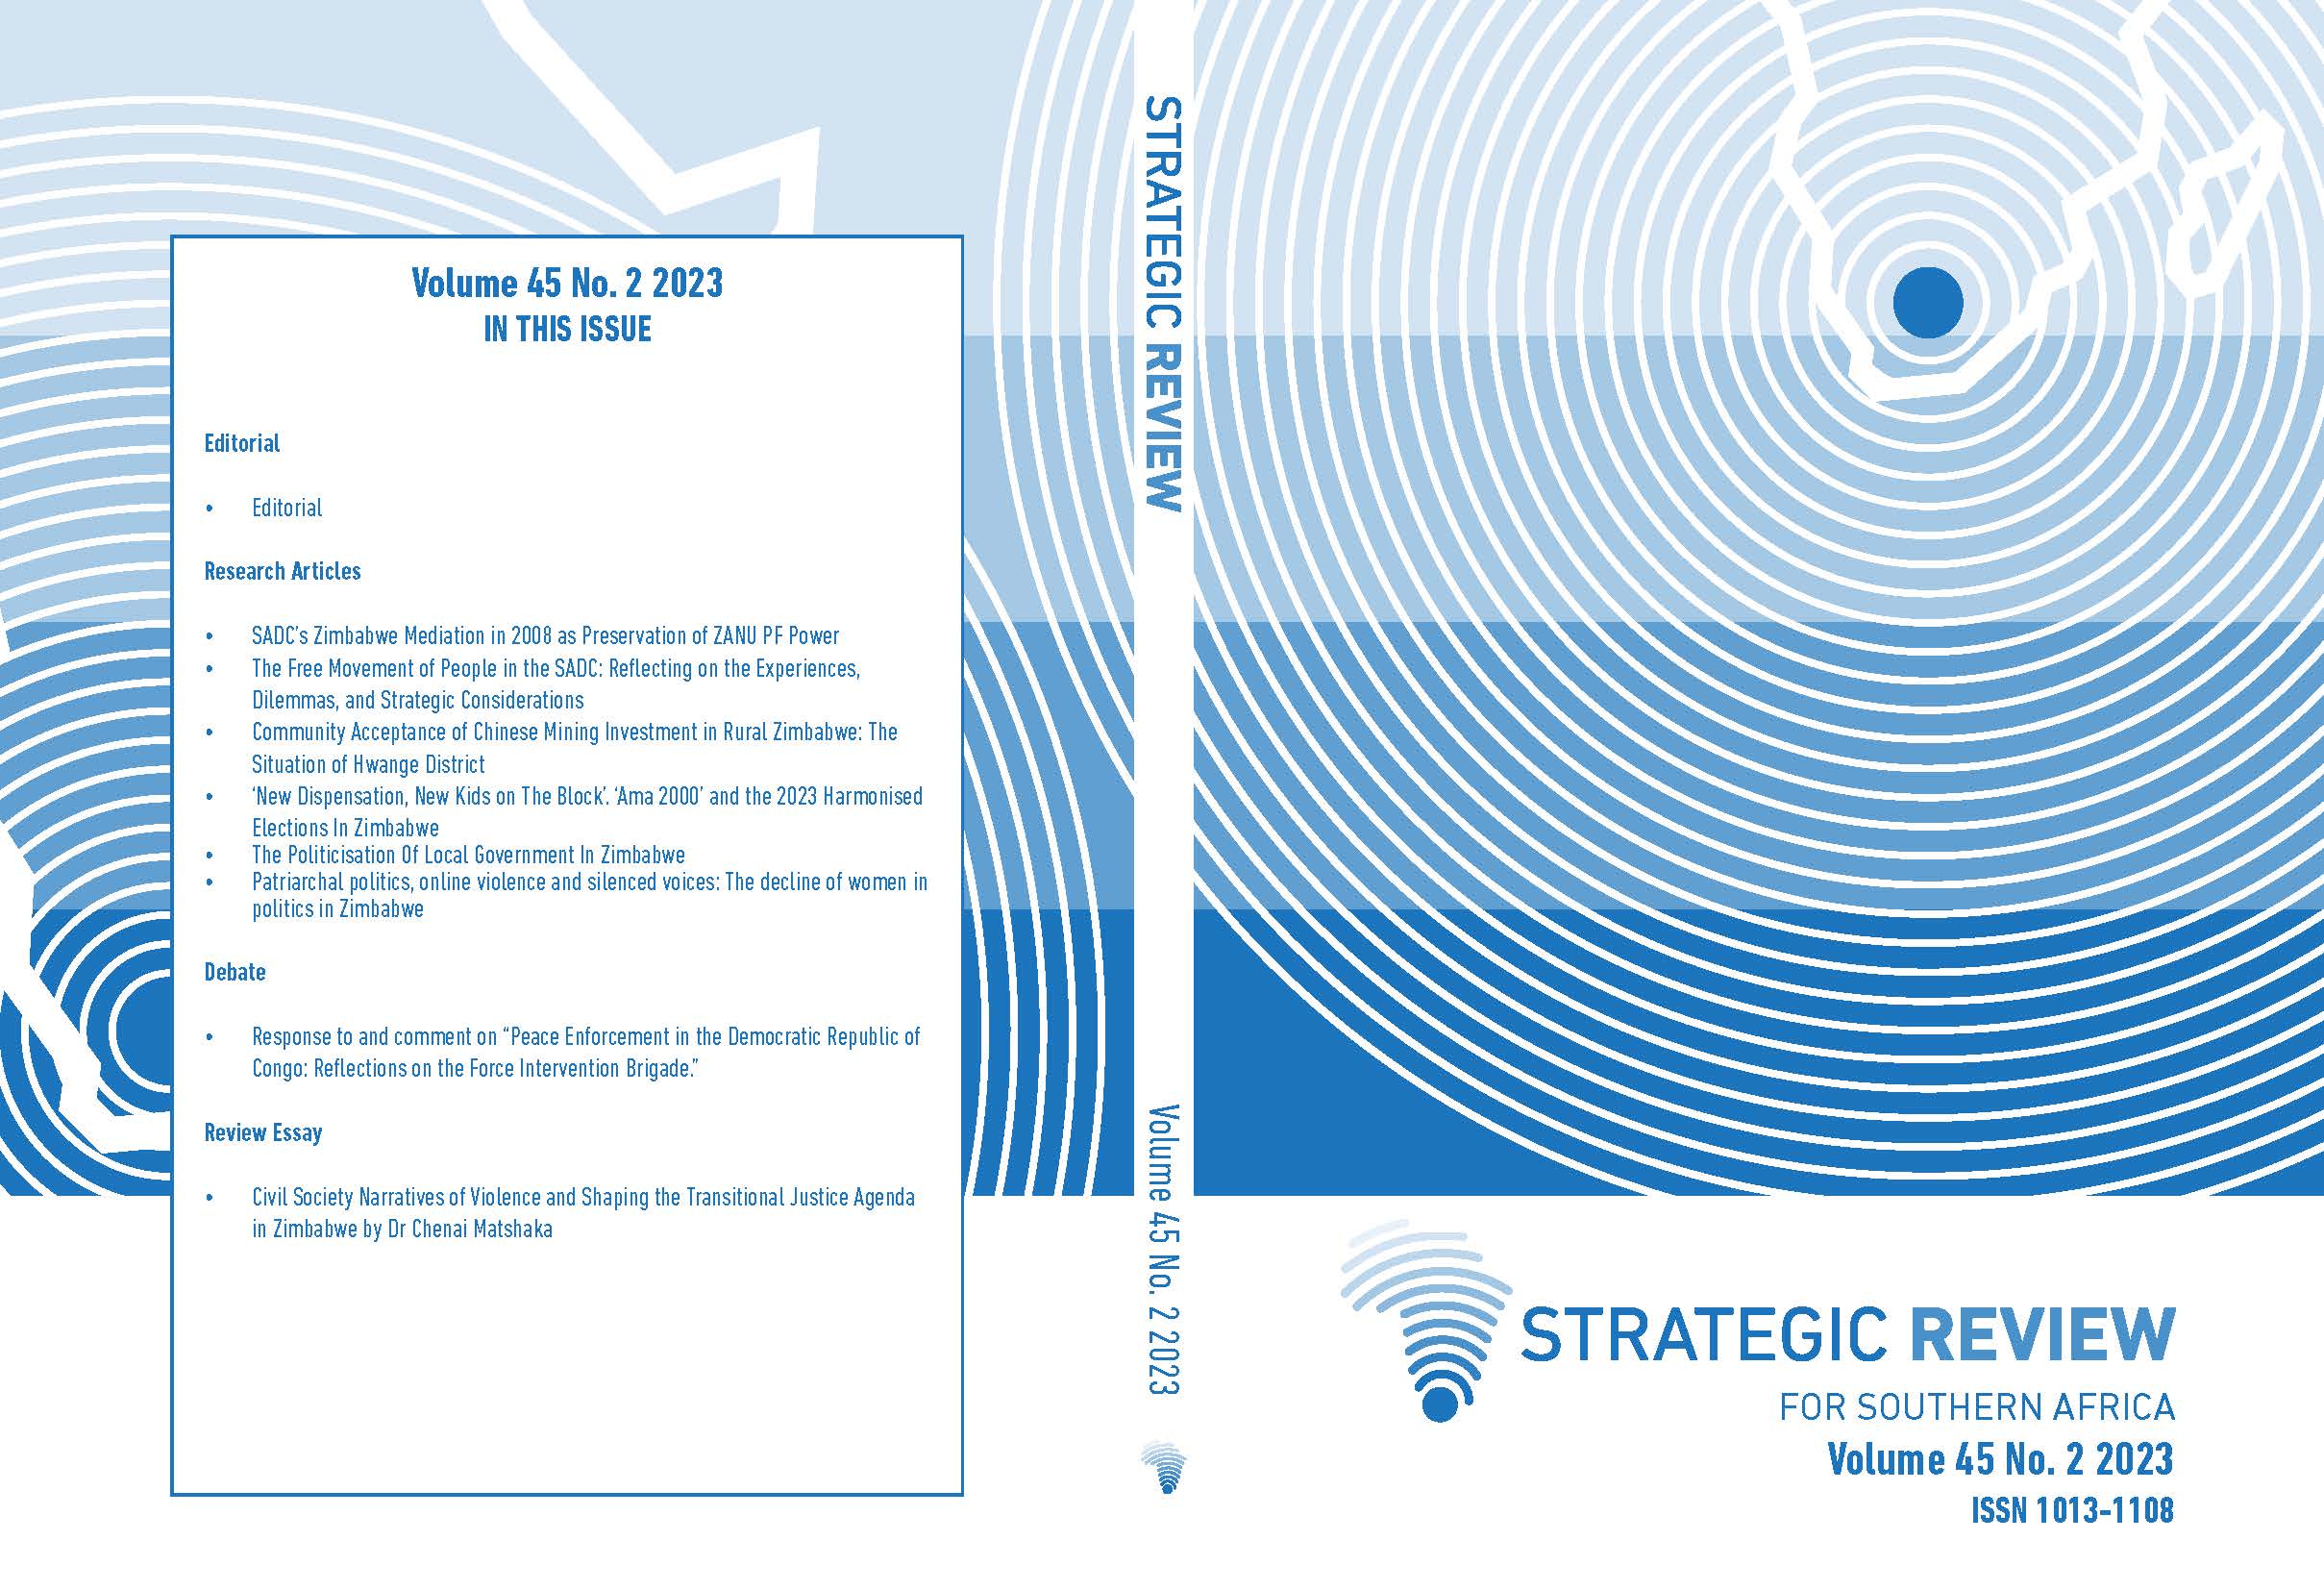 					View Vol. 45 No. 2 (2023): The Strategic Review for Southern Africa
				